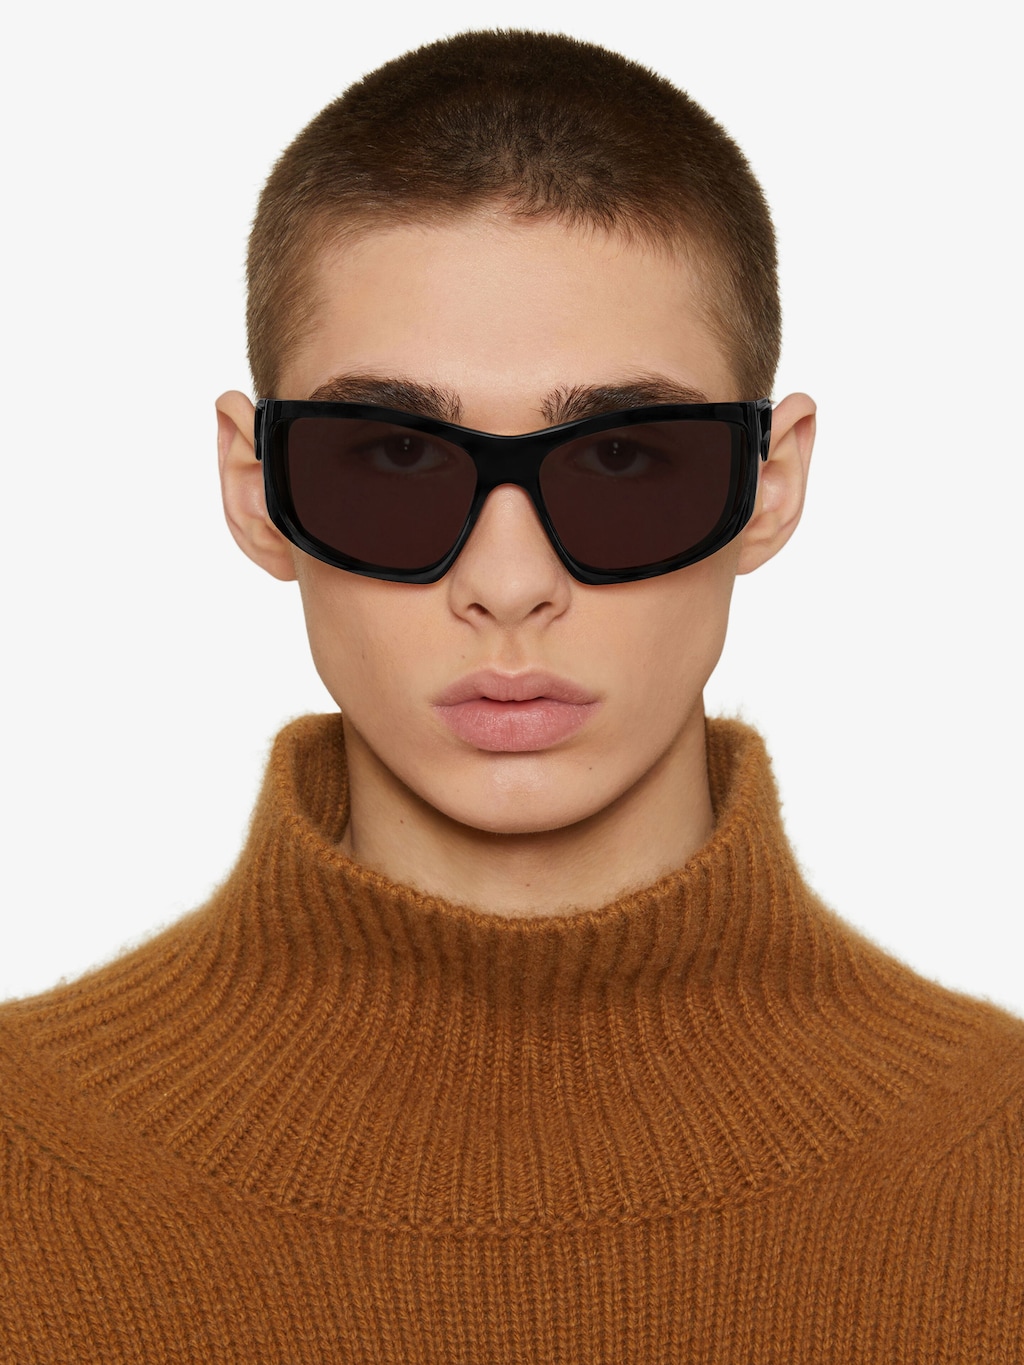 Giv Cut unisex injected sunglasses - black | Givenchy GB